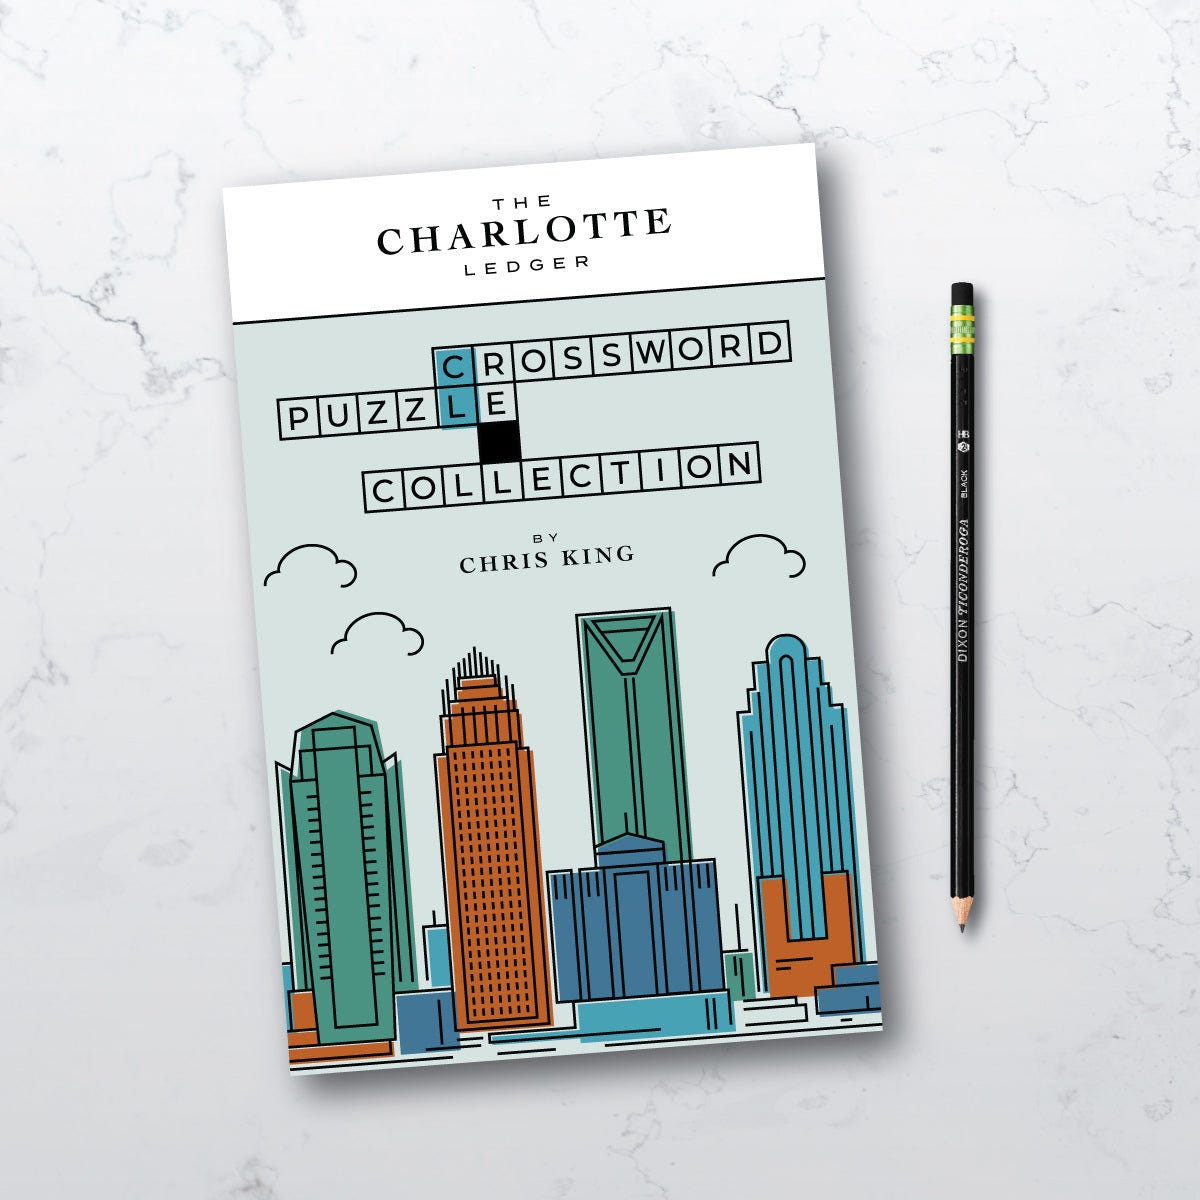 The Charlotte Ledger Crossword Puzzle Collection by Chris King